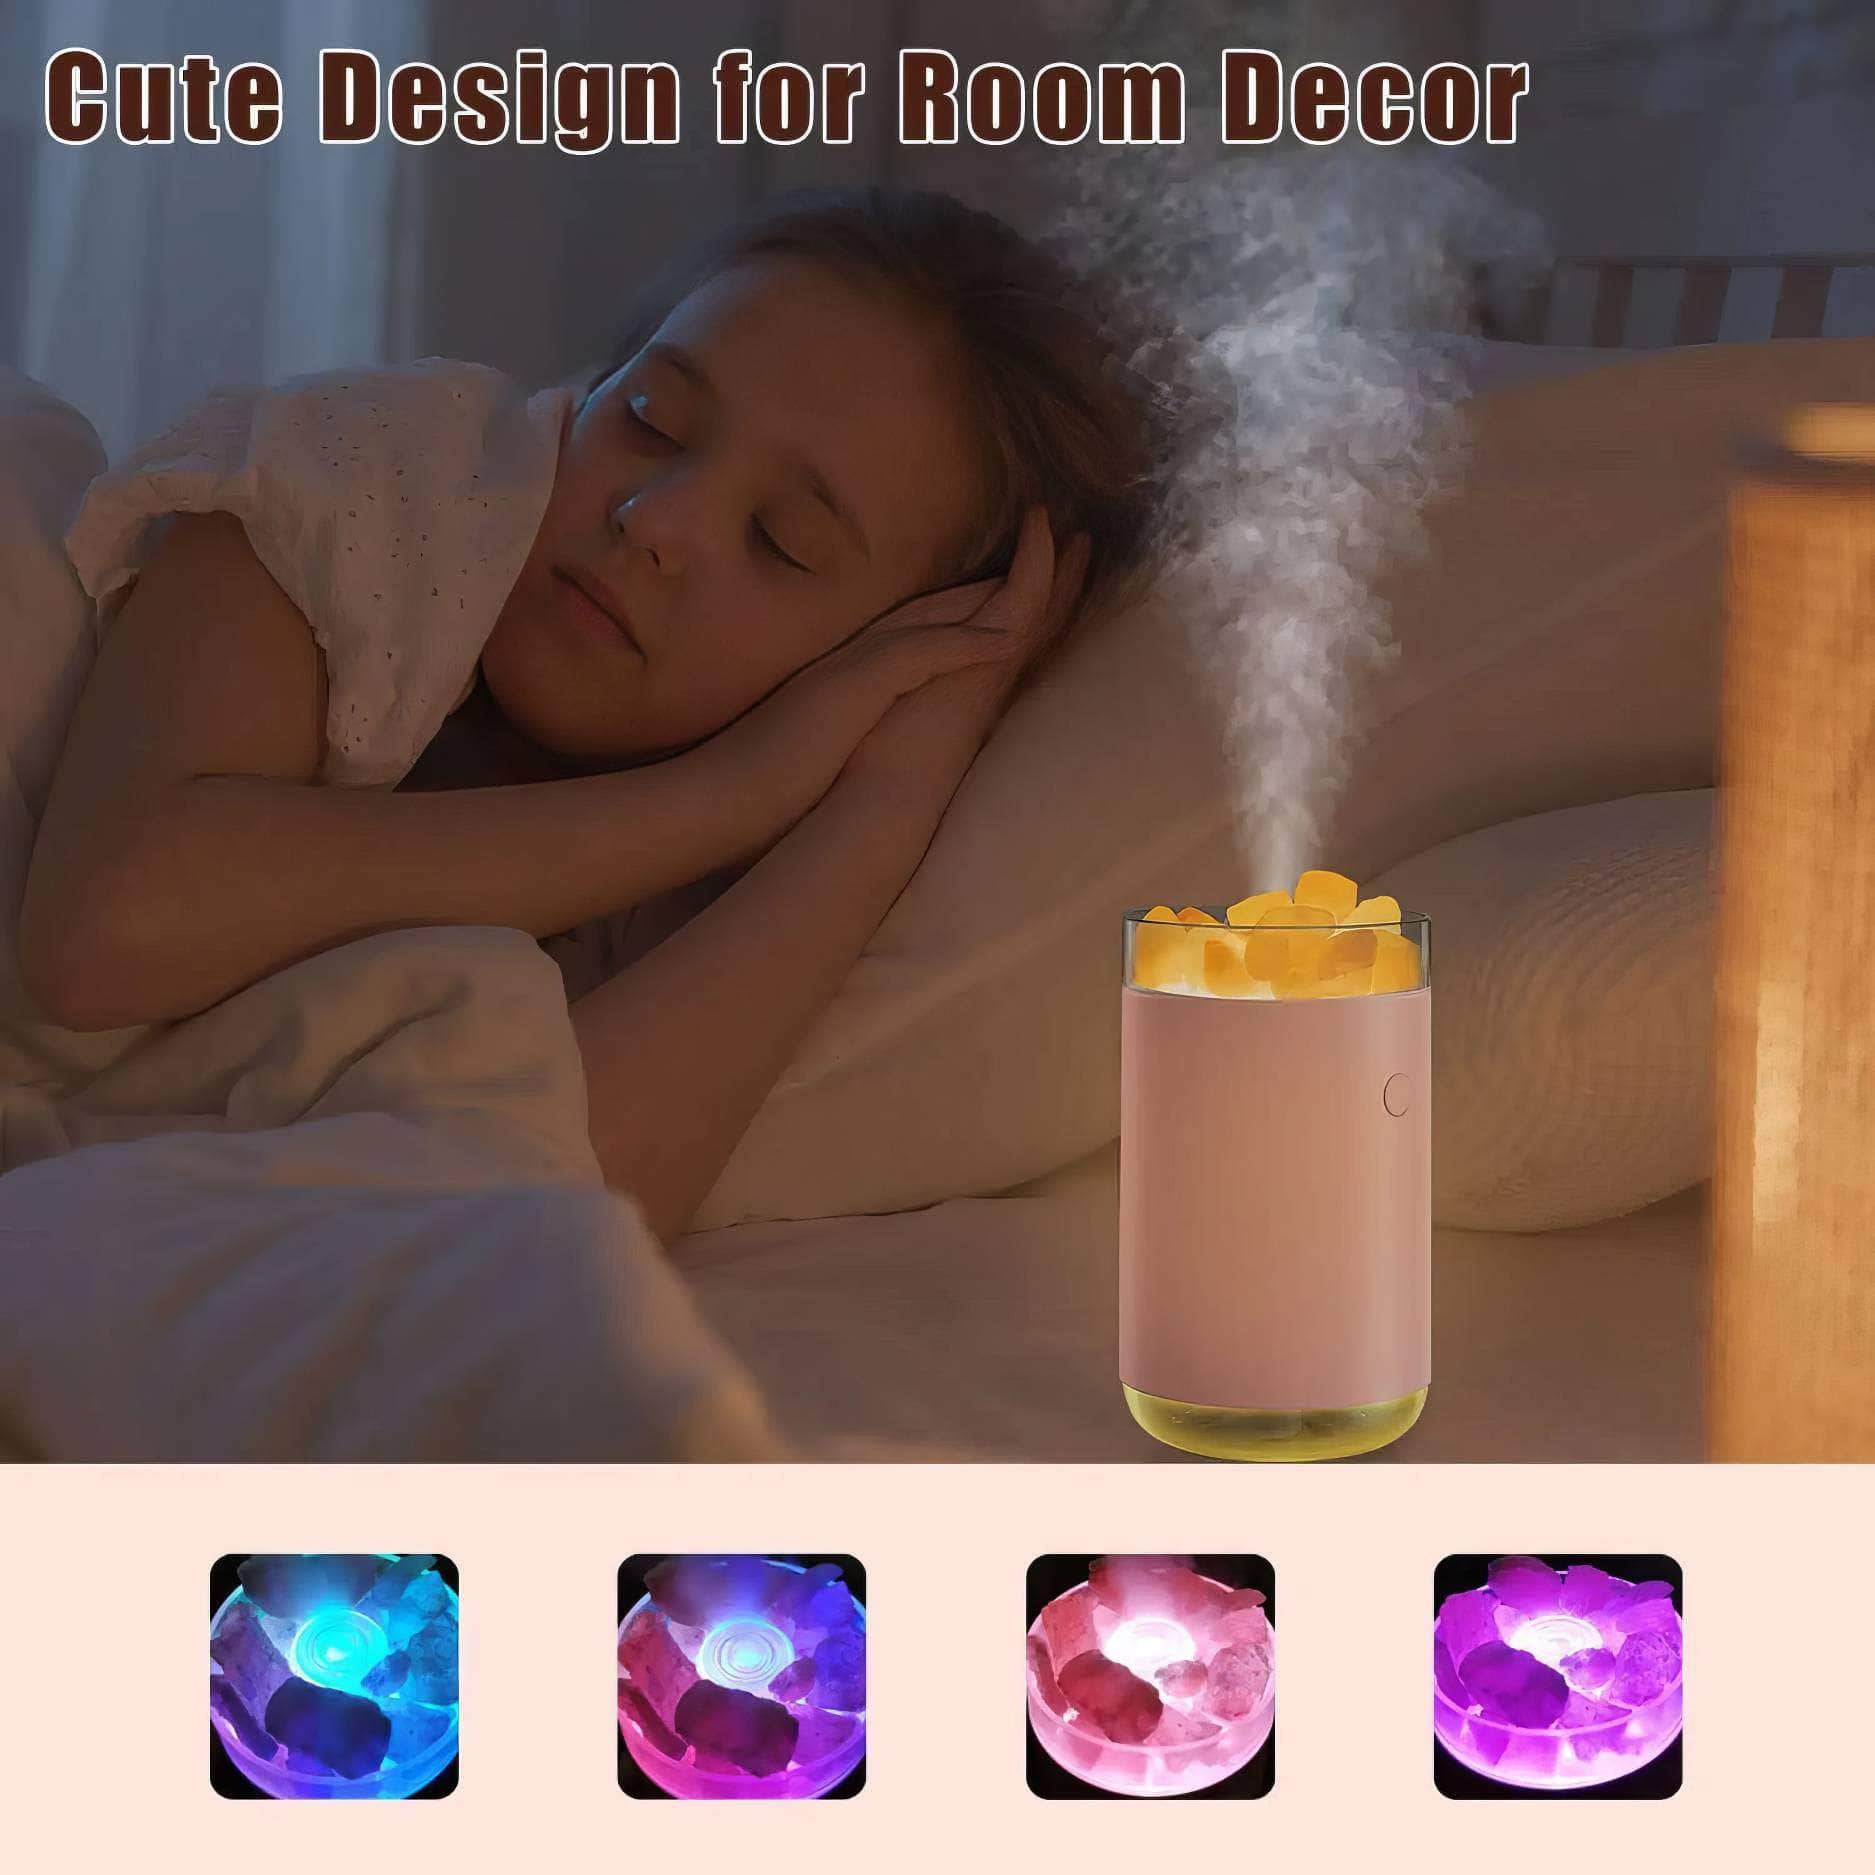 Himalayan Salt Lamp Humidifier - Cute Cool Mist, Ultra Quiet Operation, Mini Desk Air Humidifiers for Room Decor and Gifts